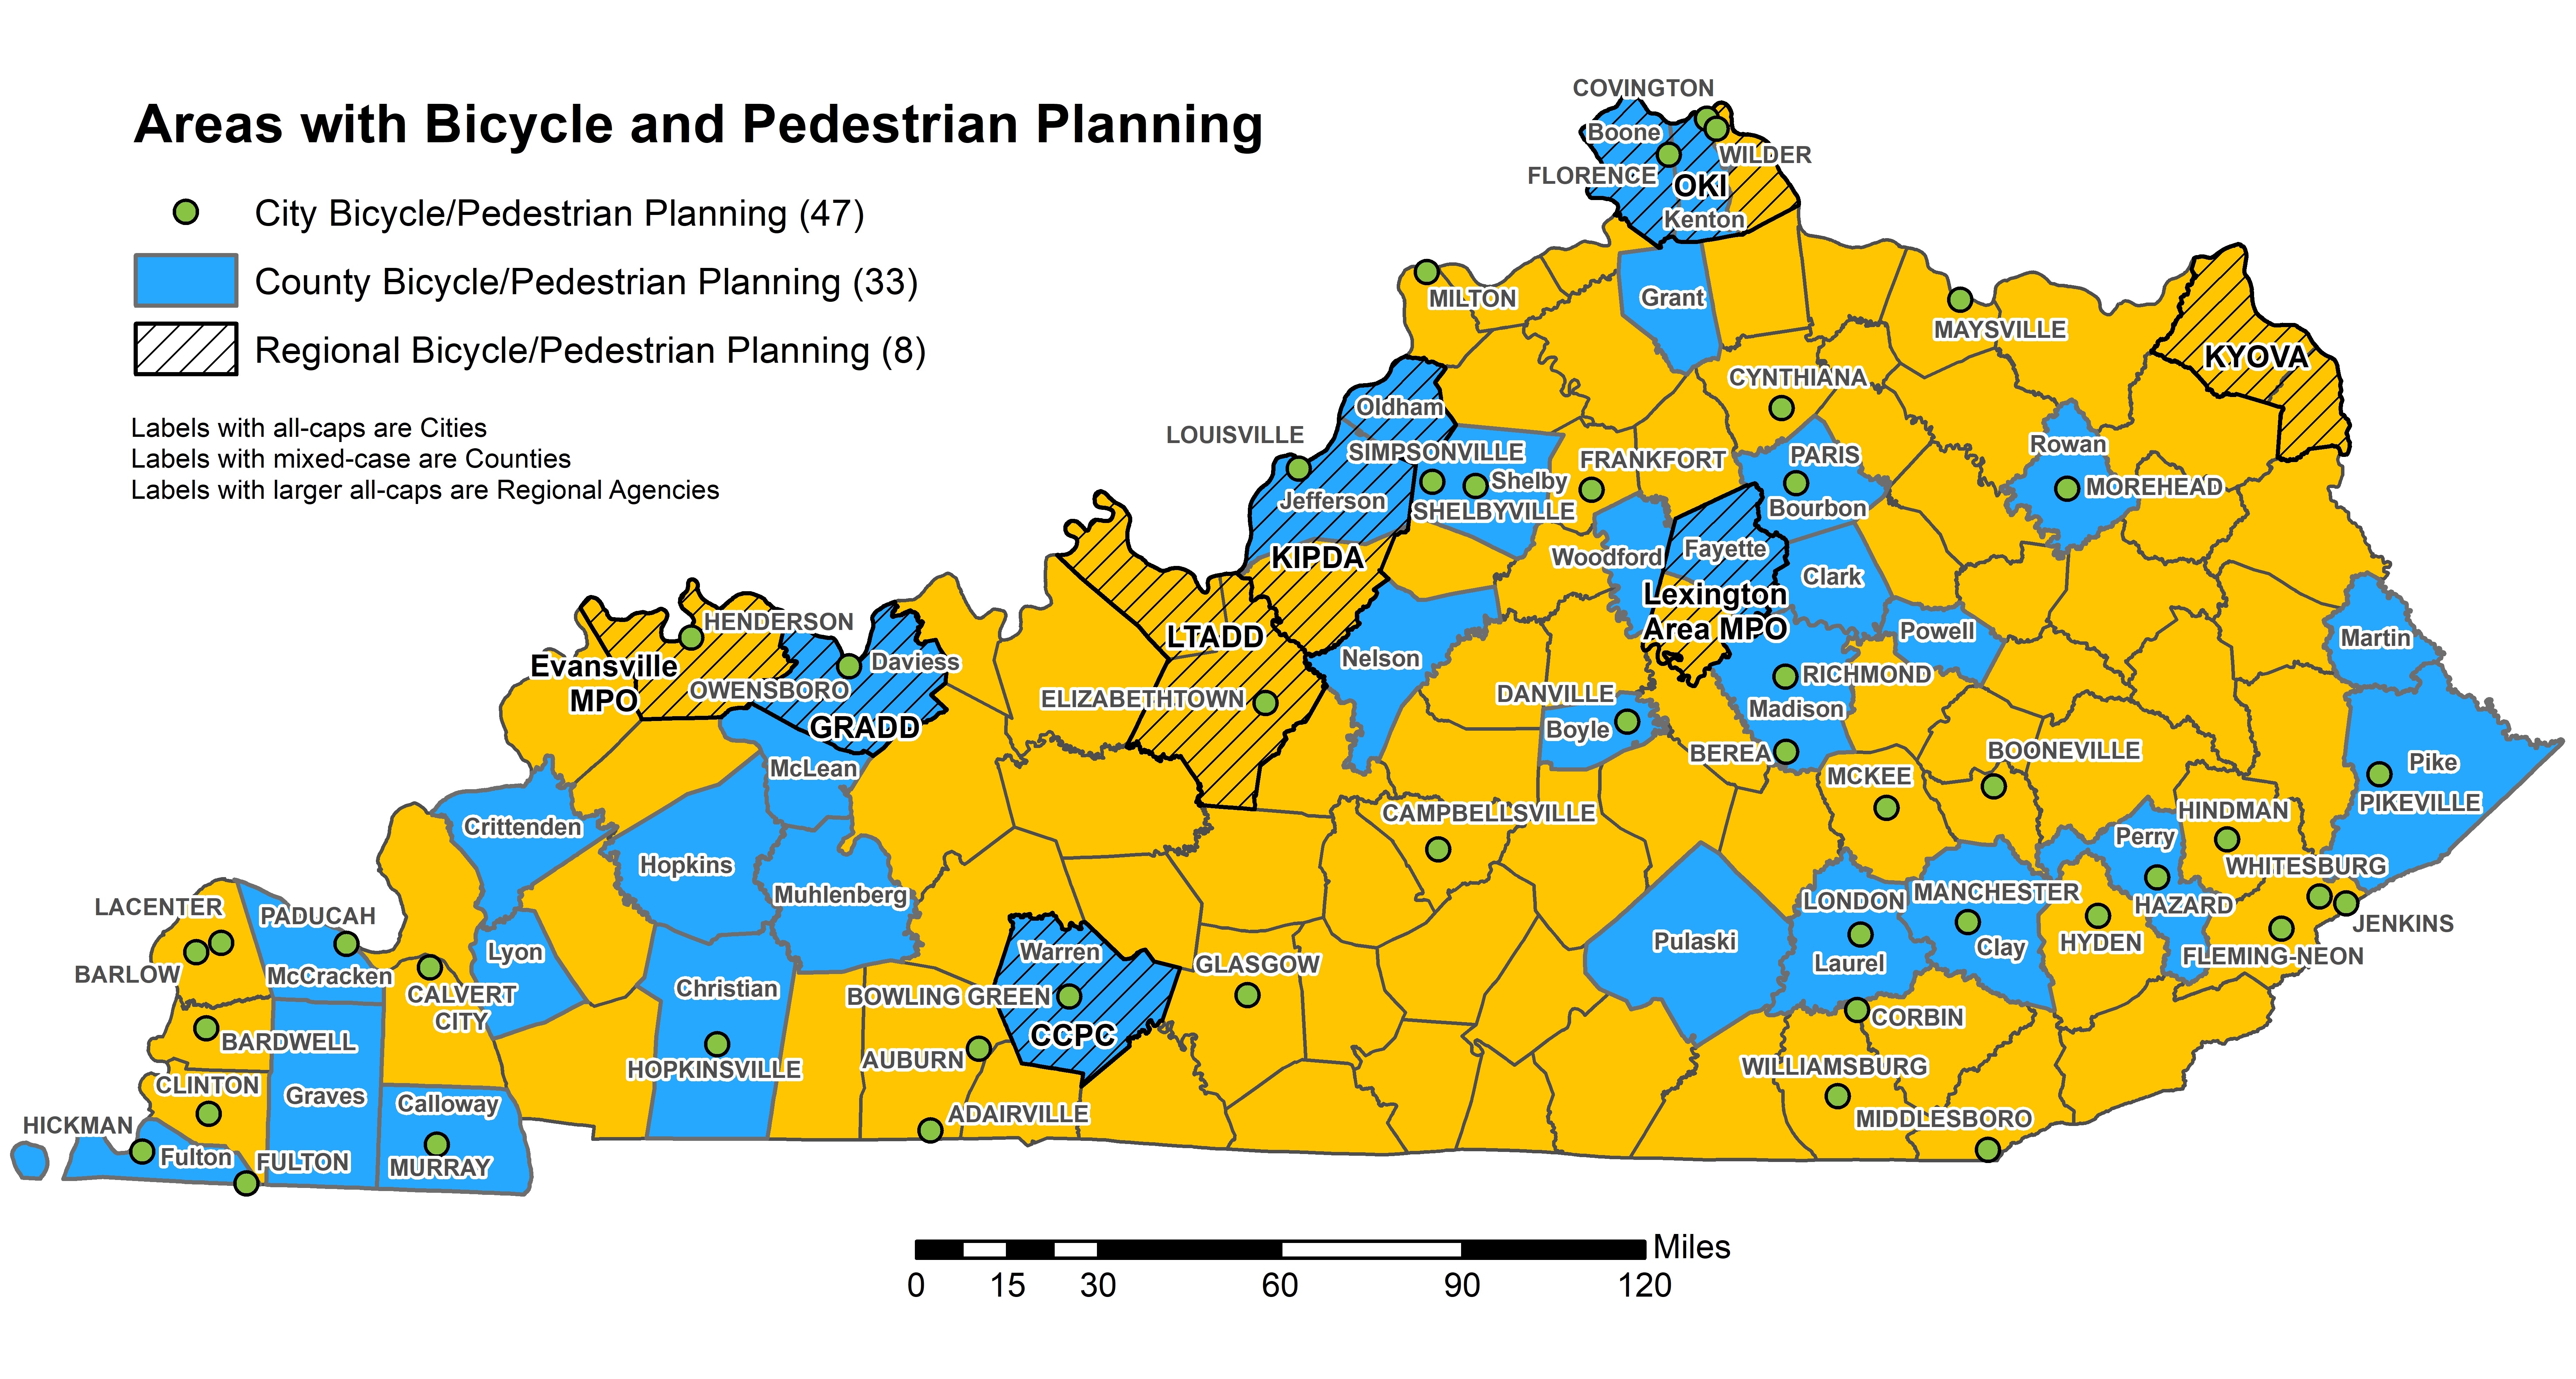 Statewide map of Kentucky depicting locations of communities and regions that have bicycle and pedestrian planning agencies